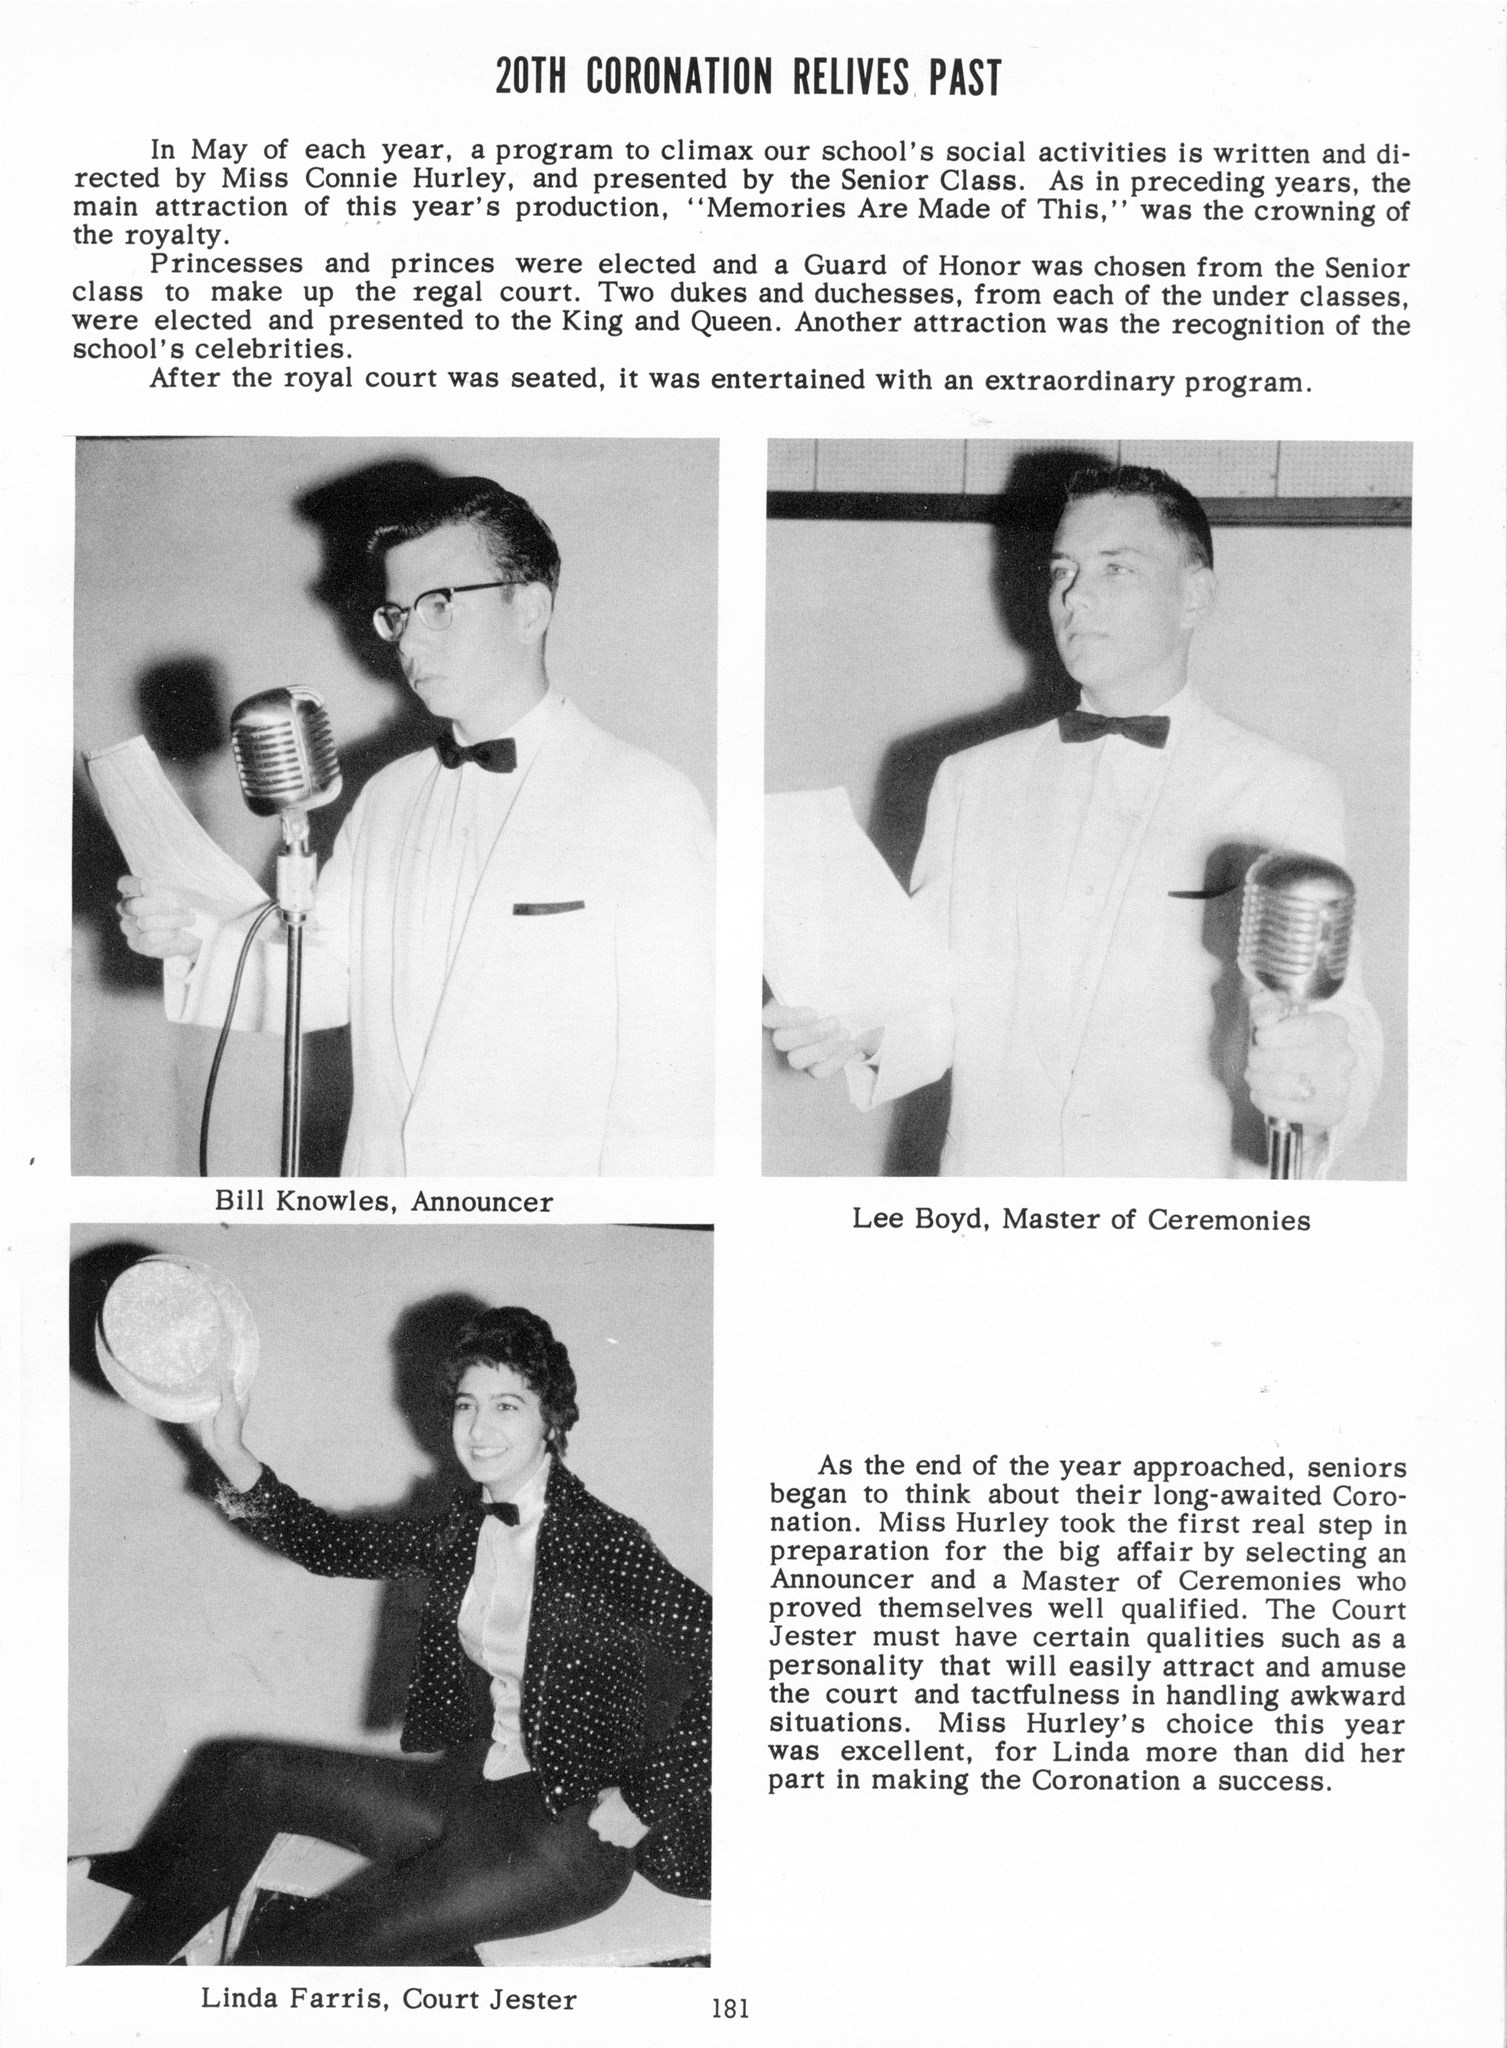 ../../../Images/Large/1960/Arclight-1960-pg0181.jpg